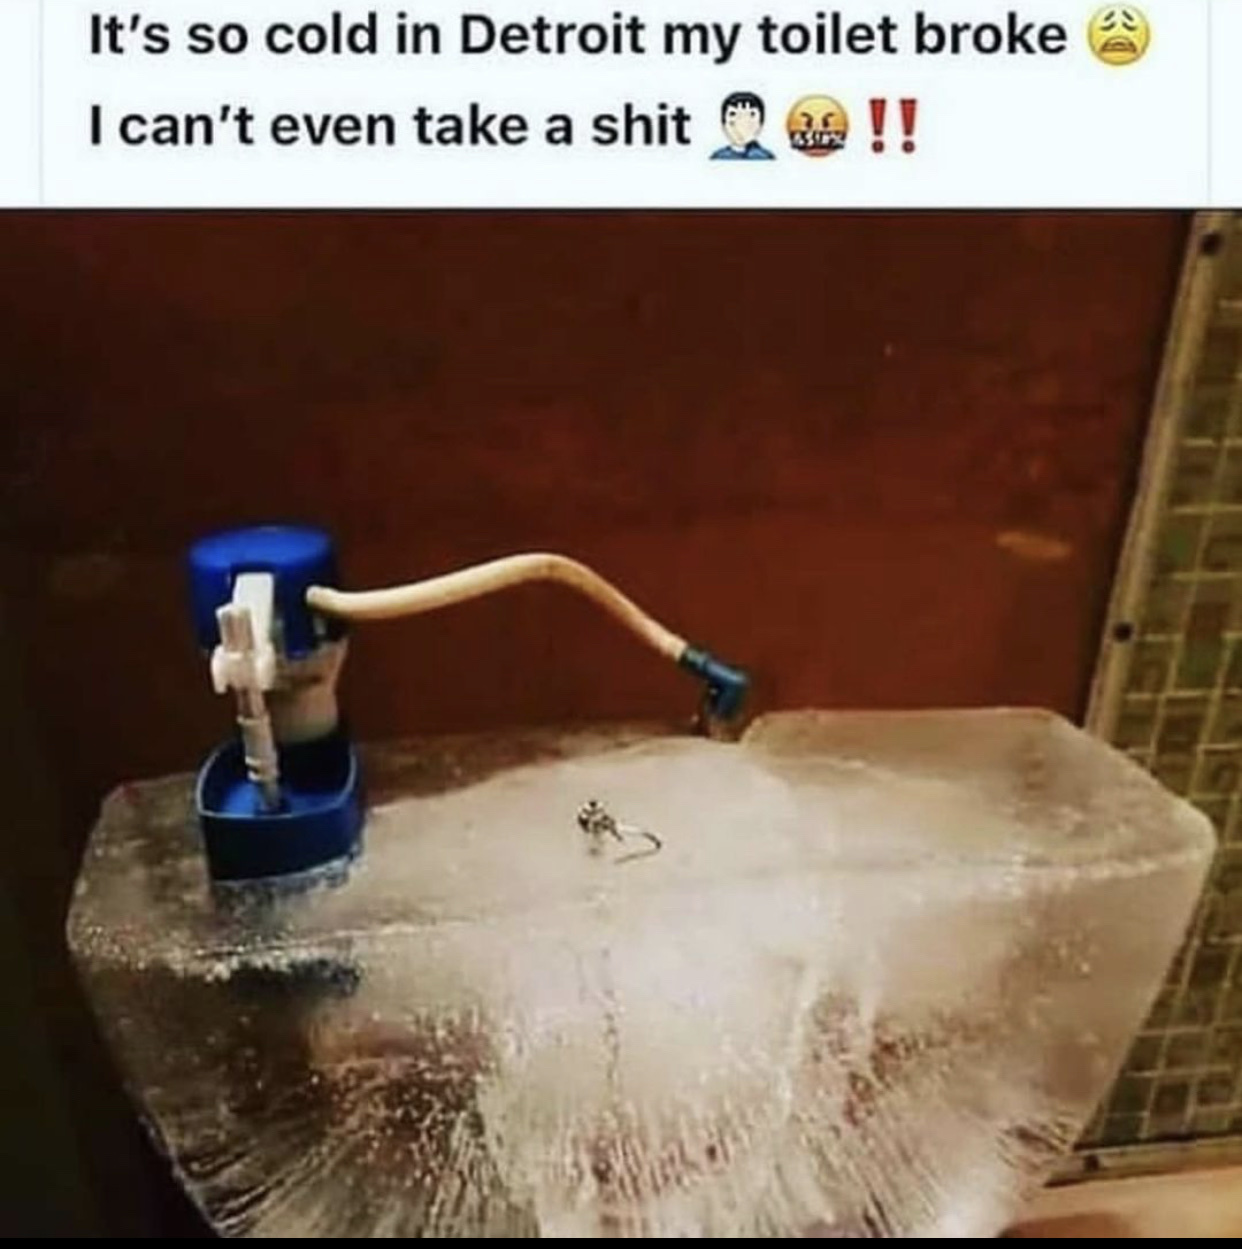 can’t have shit in Detroit - meme